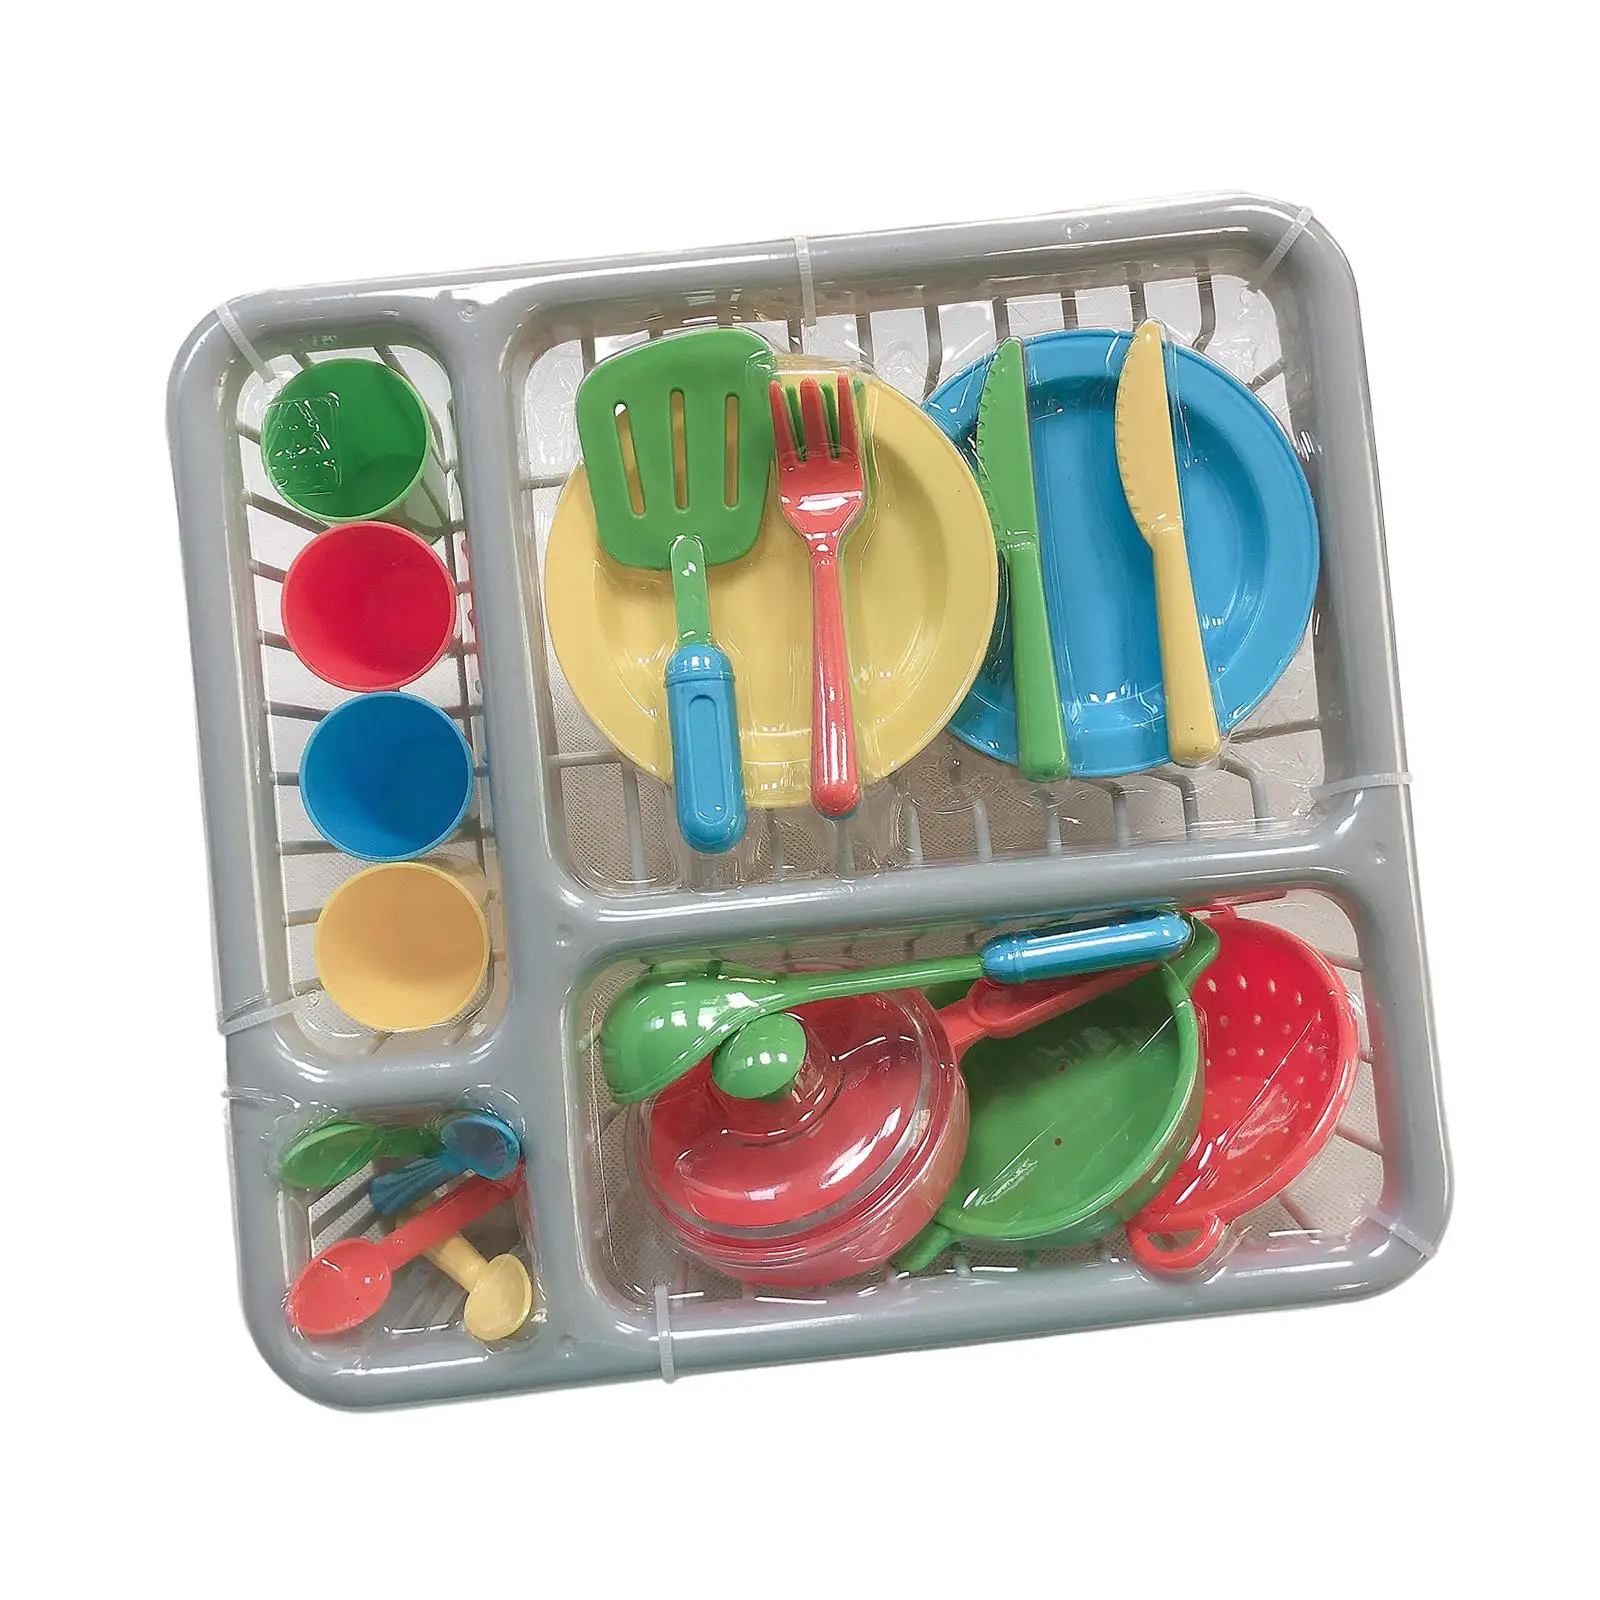 28 Pieces Child Cookware Set Role Play Game Kitchen Utensils Toy for Party Toy Ages 3+ Years Old Kids Boys Girls Birthday Gift